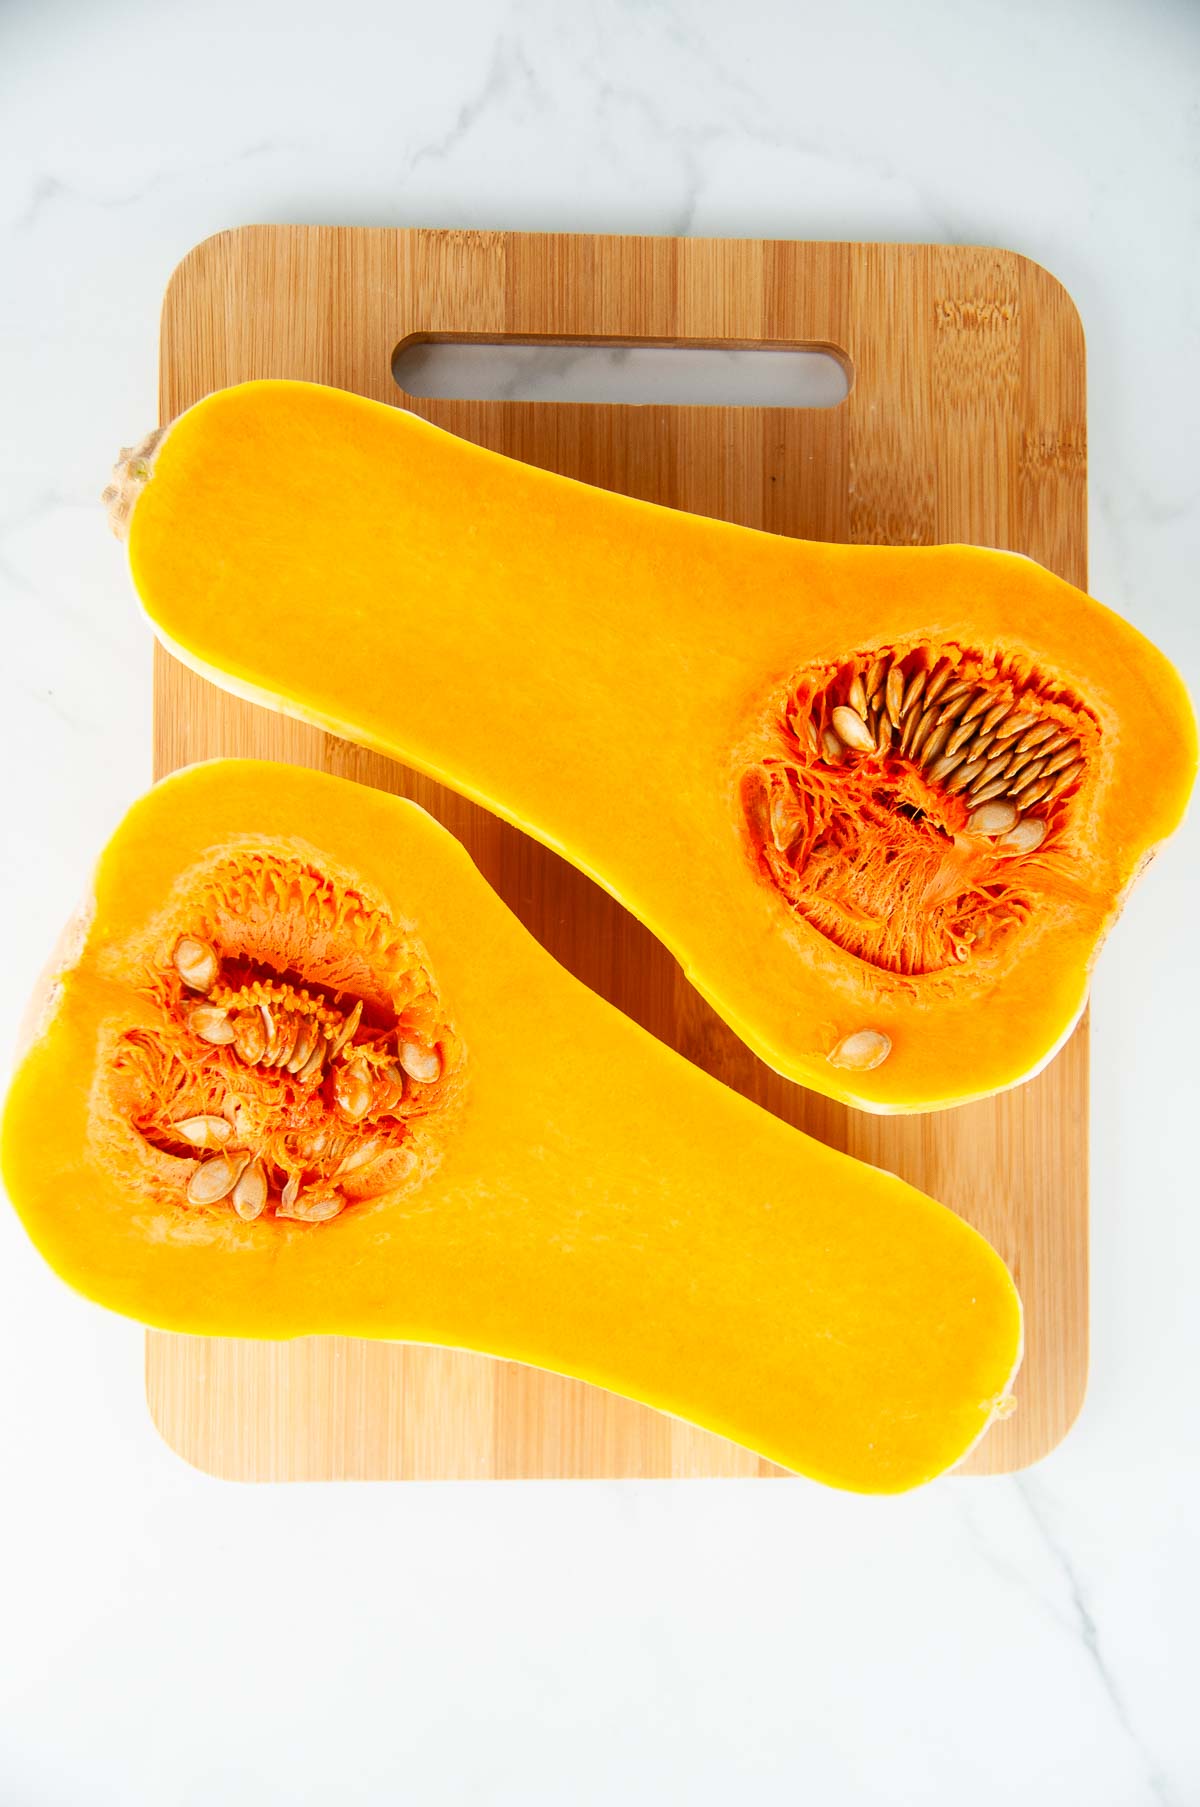 Cut the butternut squash in half to access the seeds in the cavity.